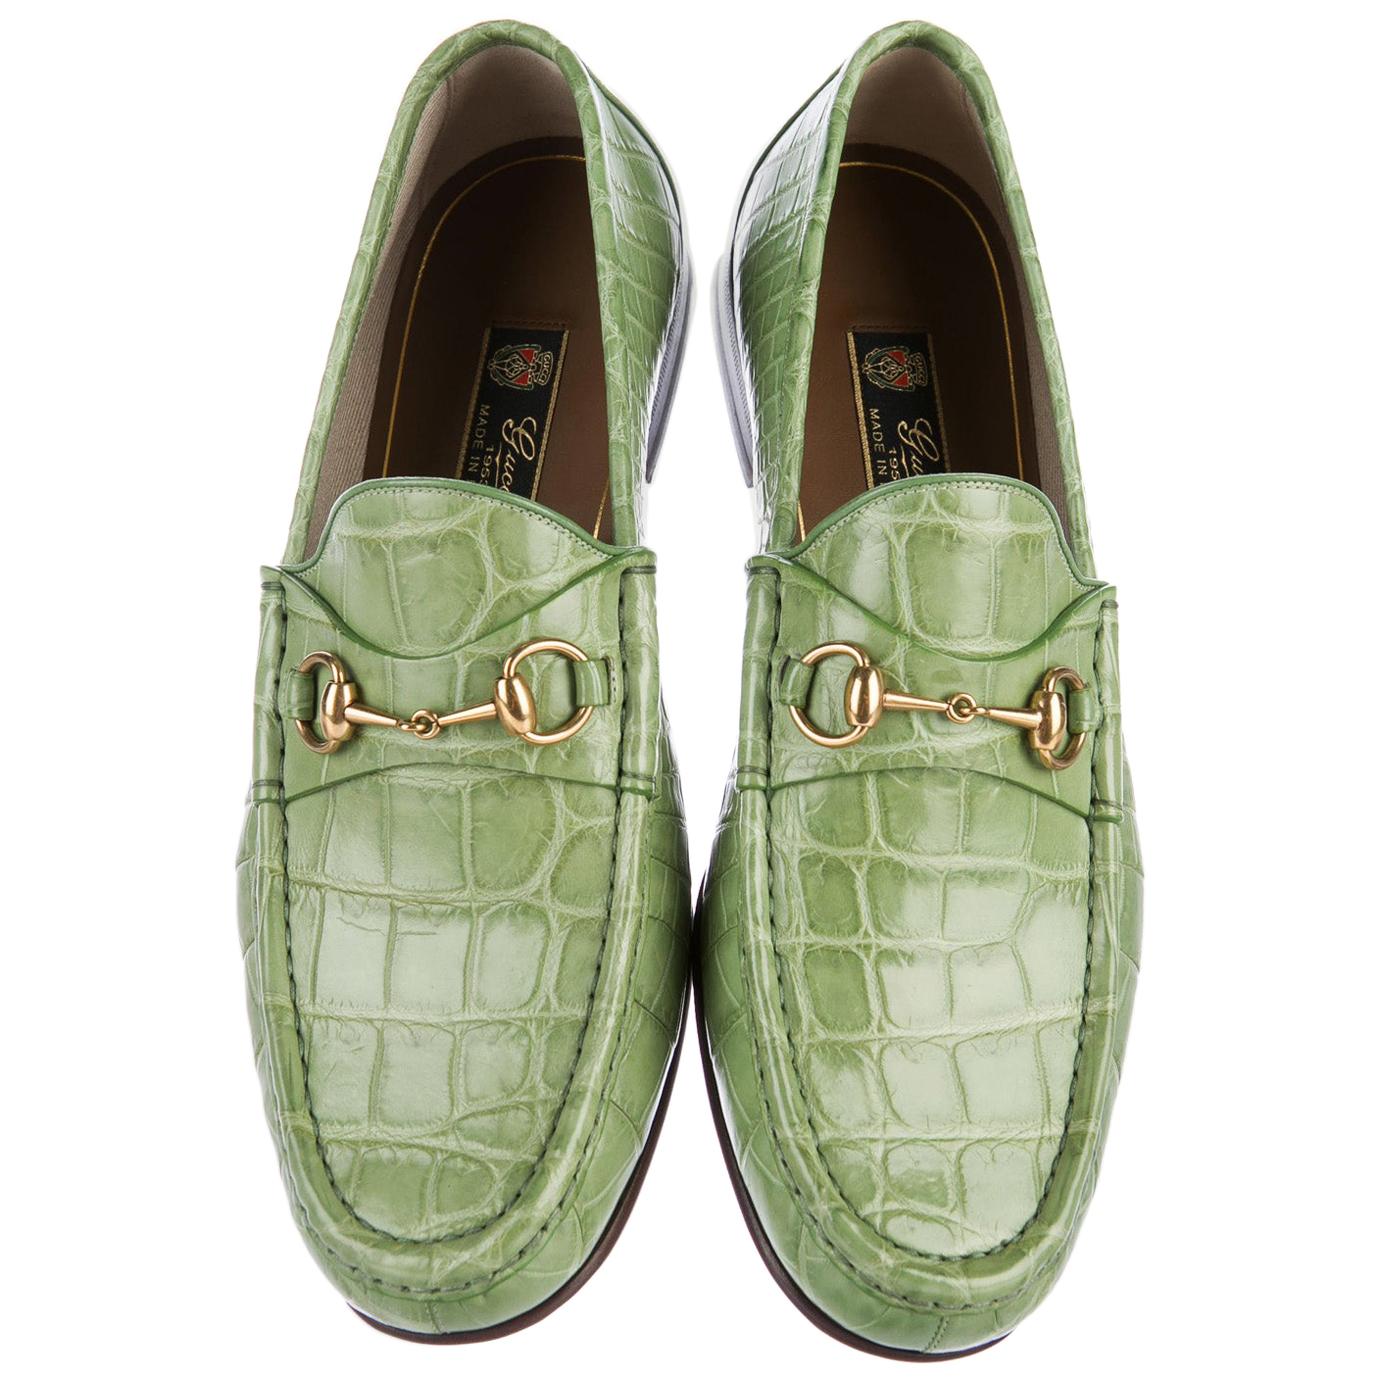 New Gucci Men's Horsebit Crocodile Countryside Loafers 60th ANNIVERSARY Tag For Sale